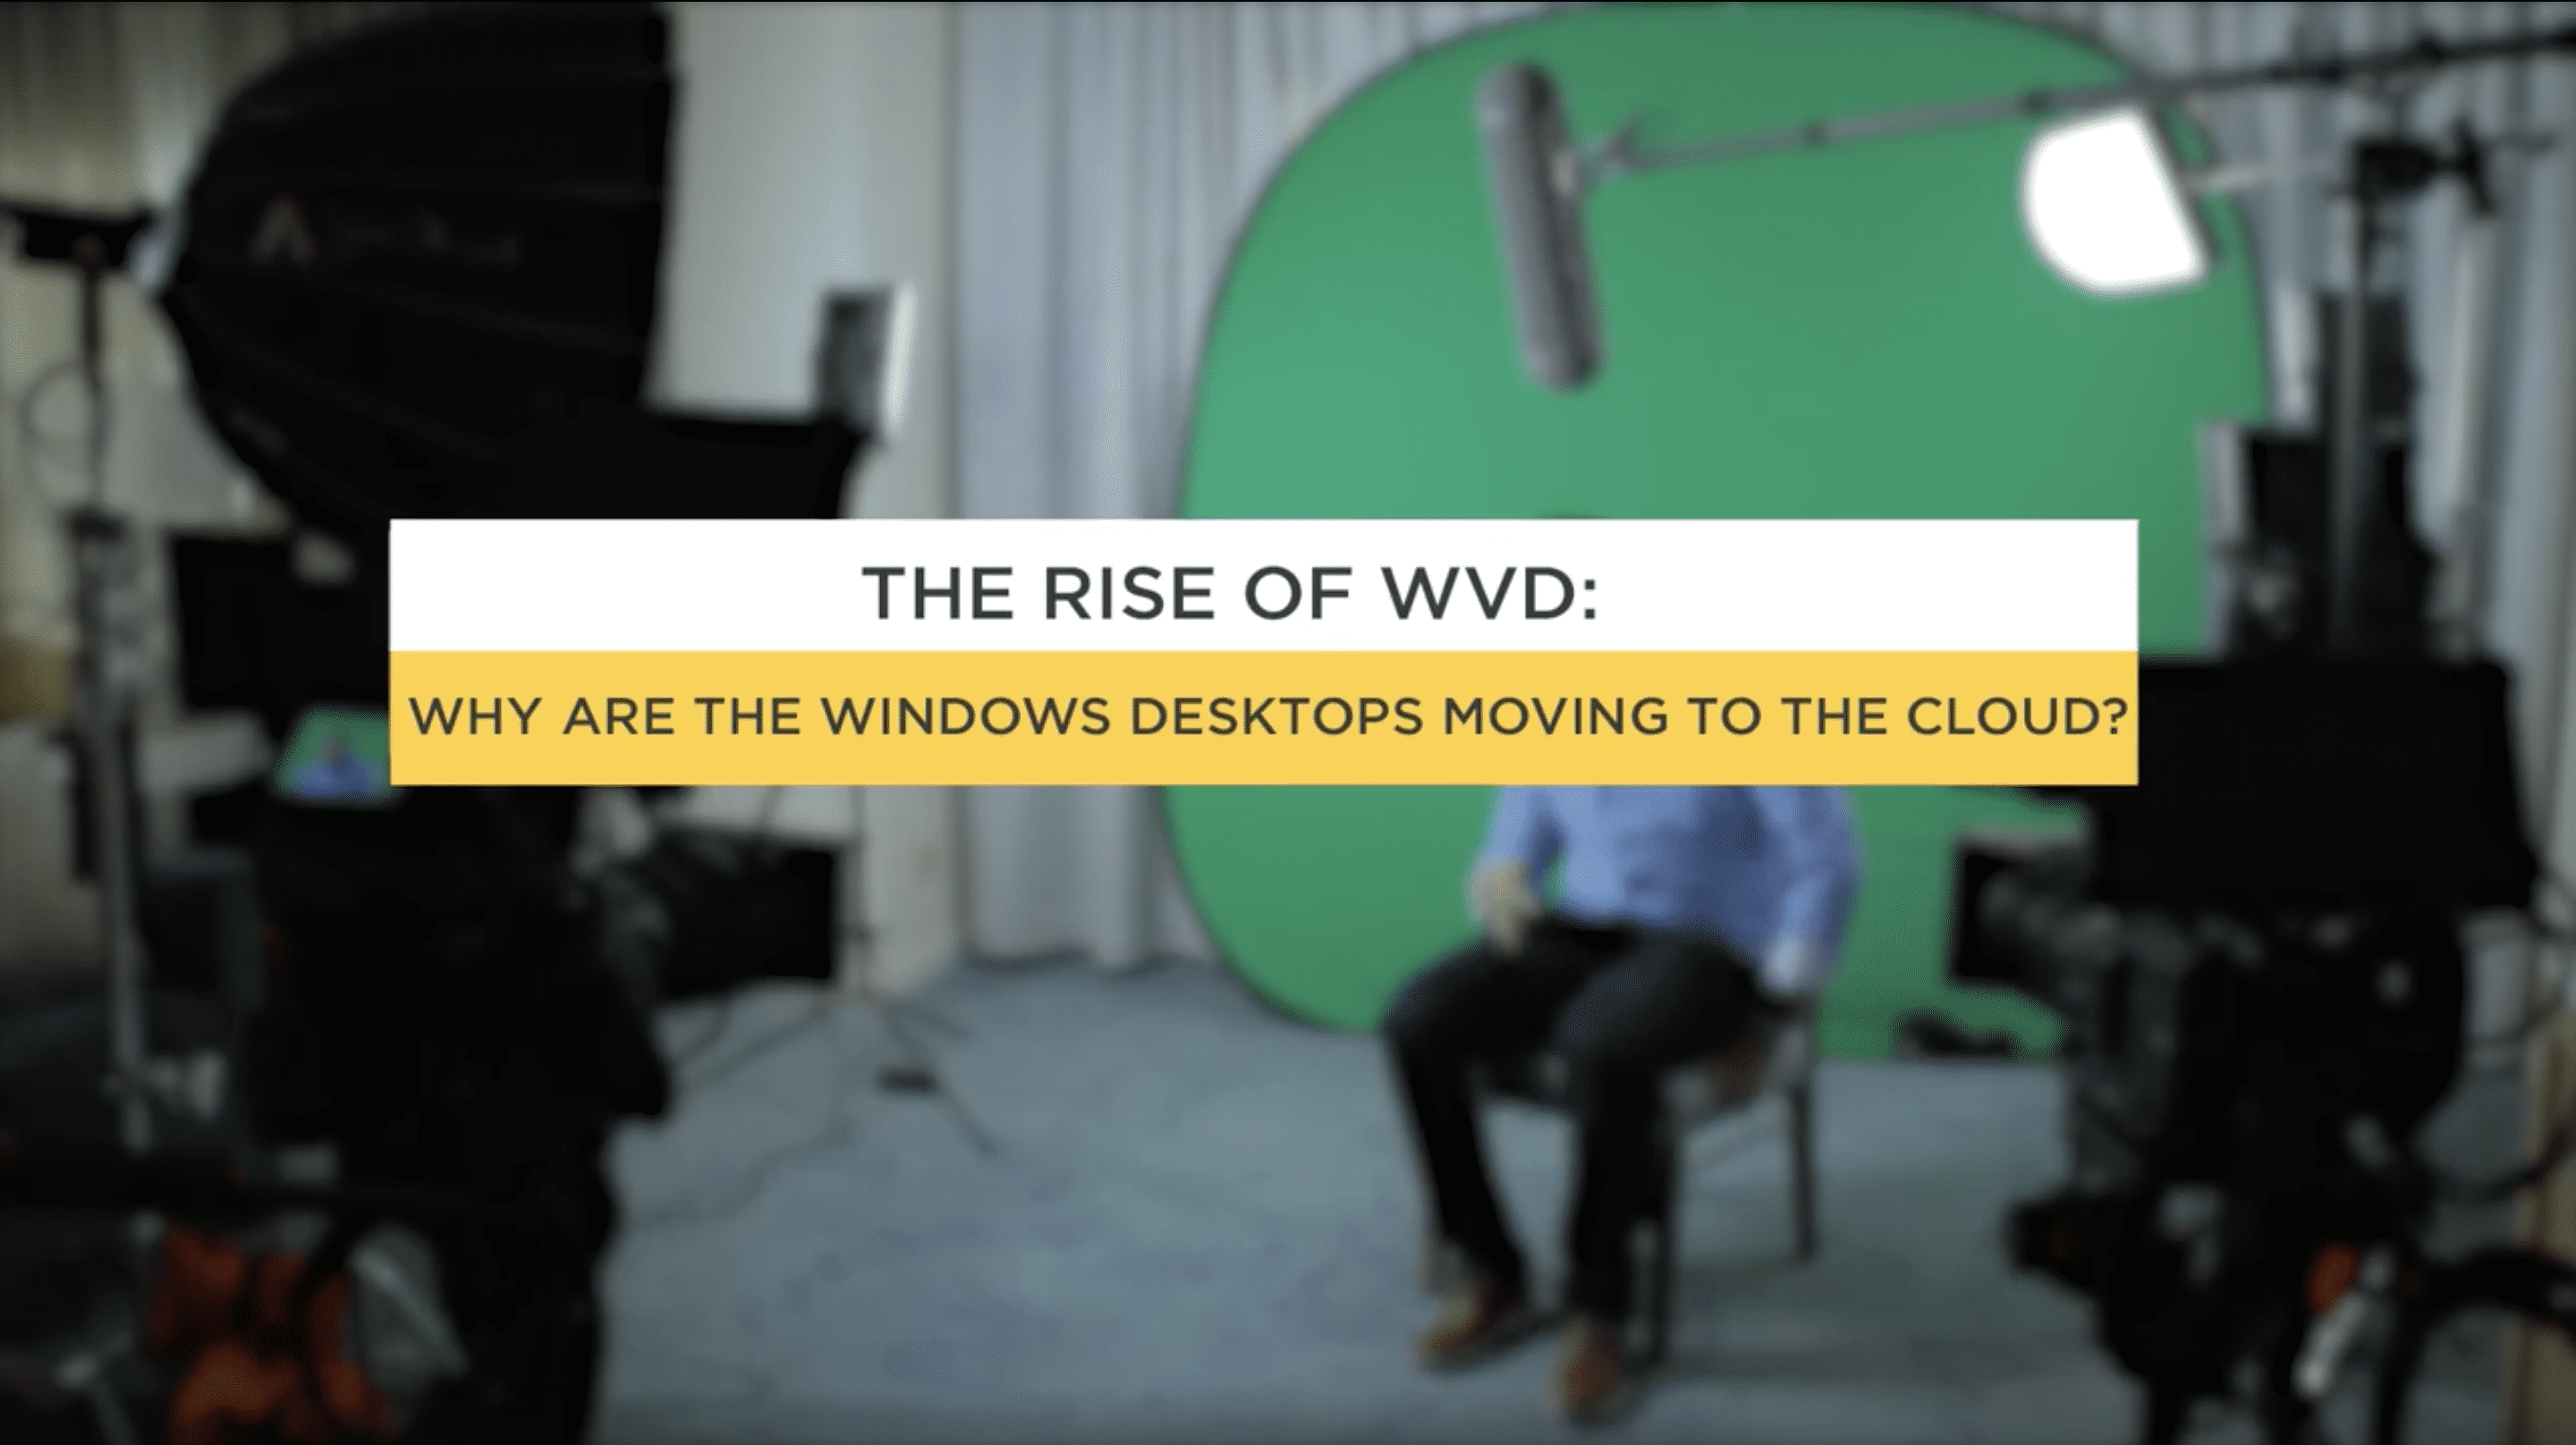 The Rise of WVD: Why are Windows Desktops Moving to the Cloud – Part 1